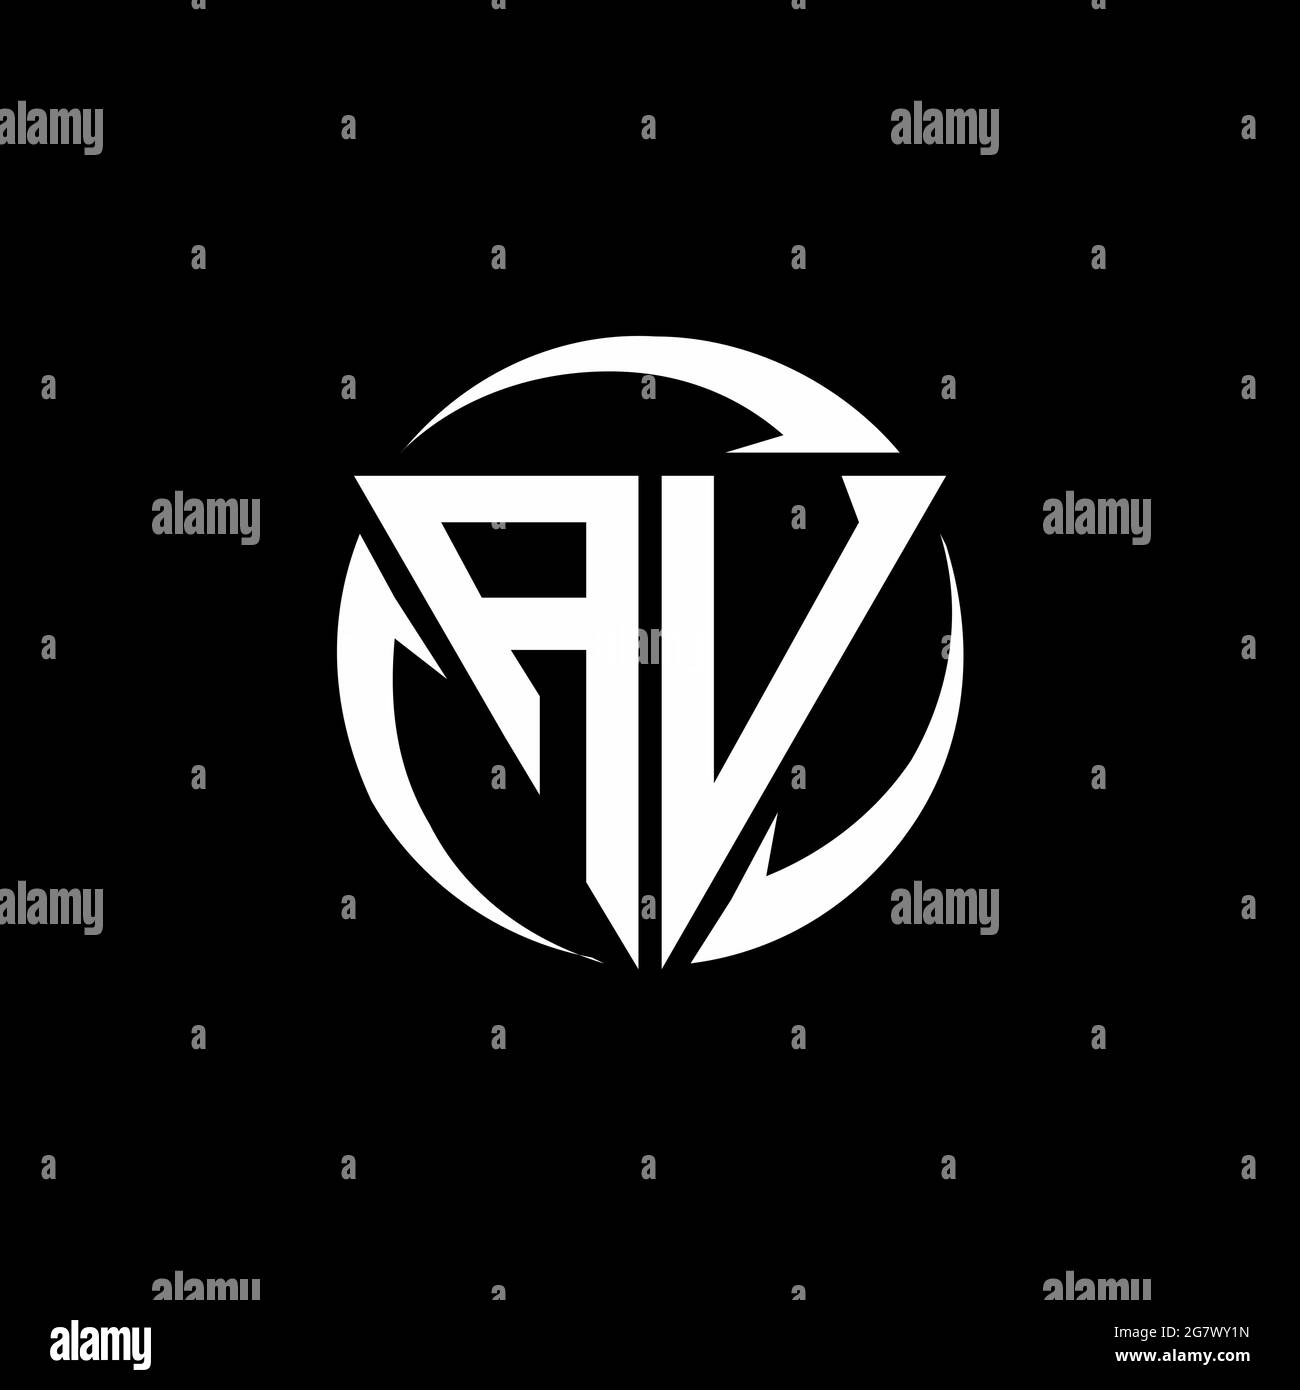 AV logo with triangle shape and circle rounded design template isolated on black background Stock Vector